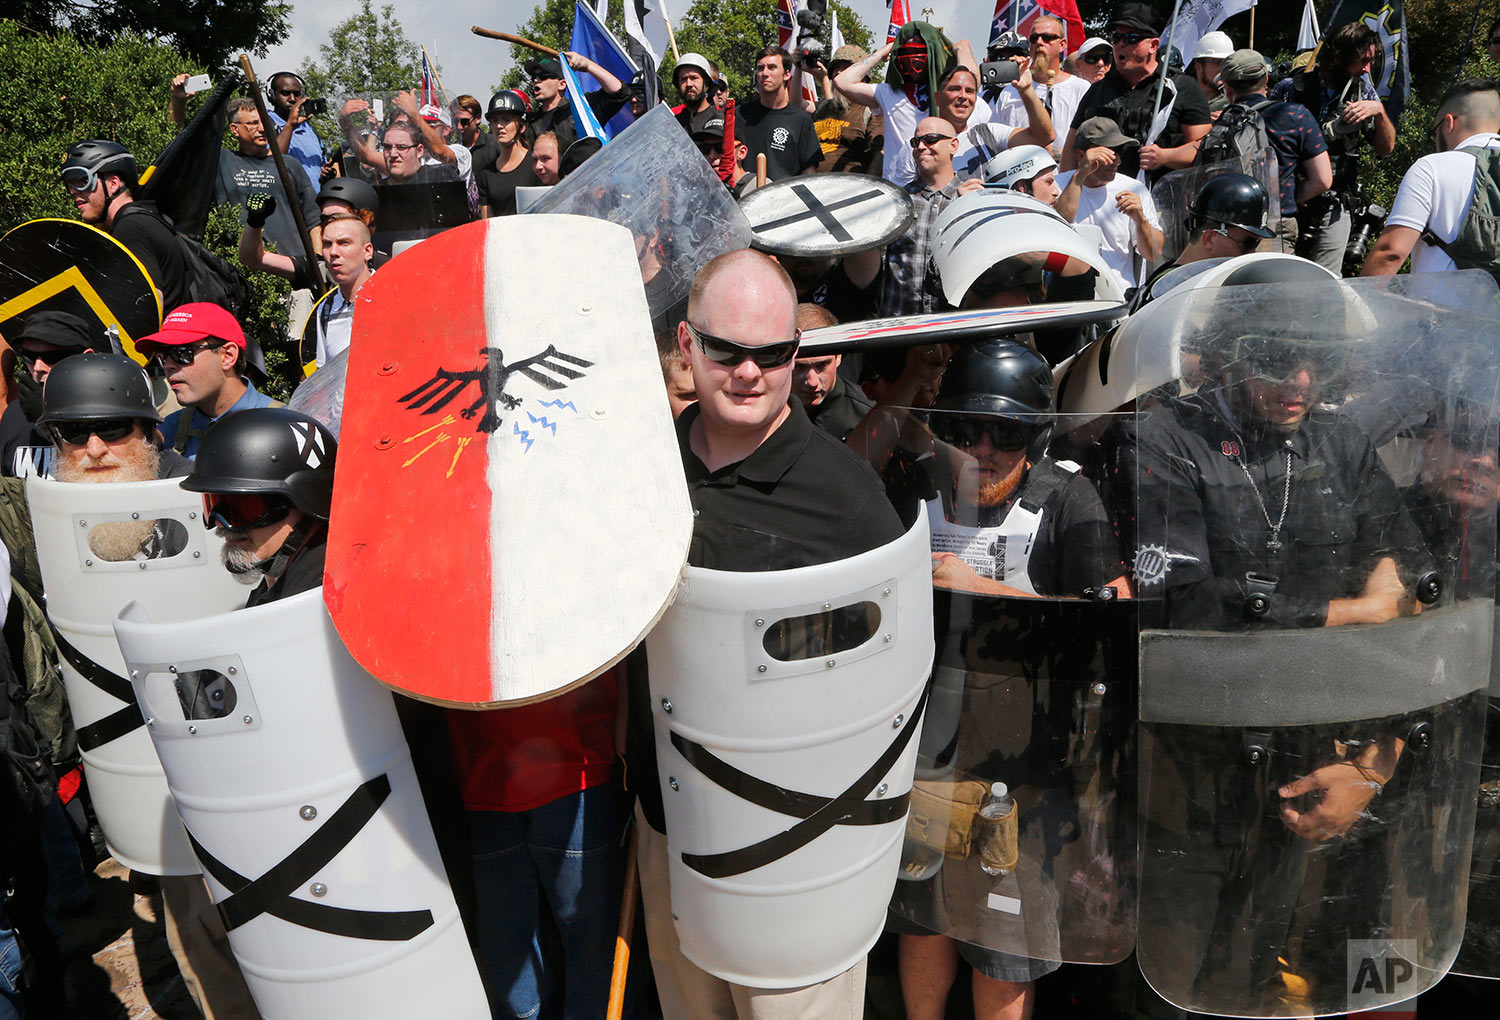  White nationalist demonstrators use shields as they guard the entrance to Lee Park in Charlottesville, Va., Saturday, Aug. 12, 2017. (AP Photo/Steve Helber) 